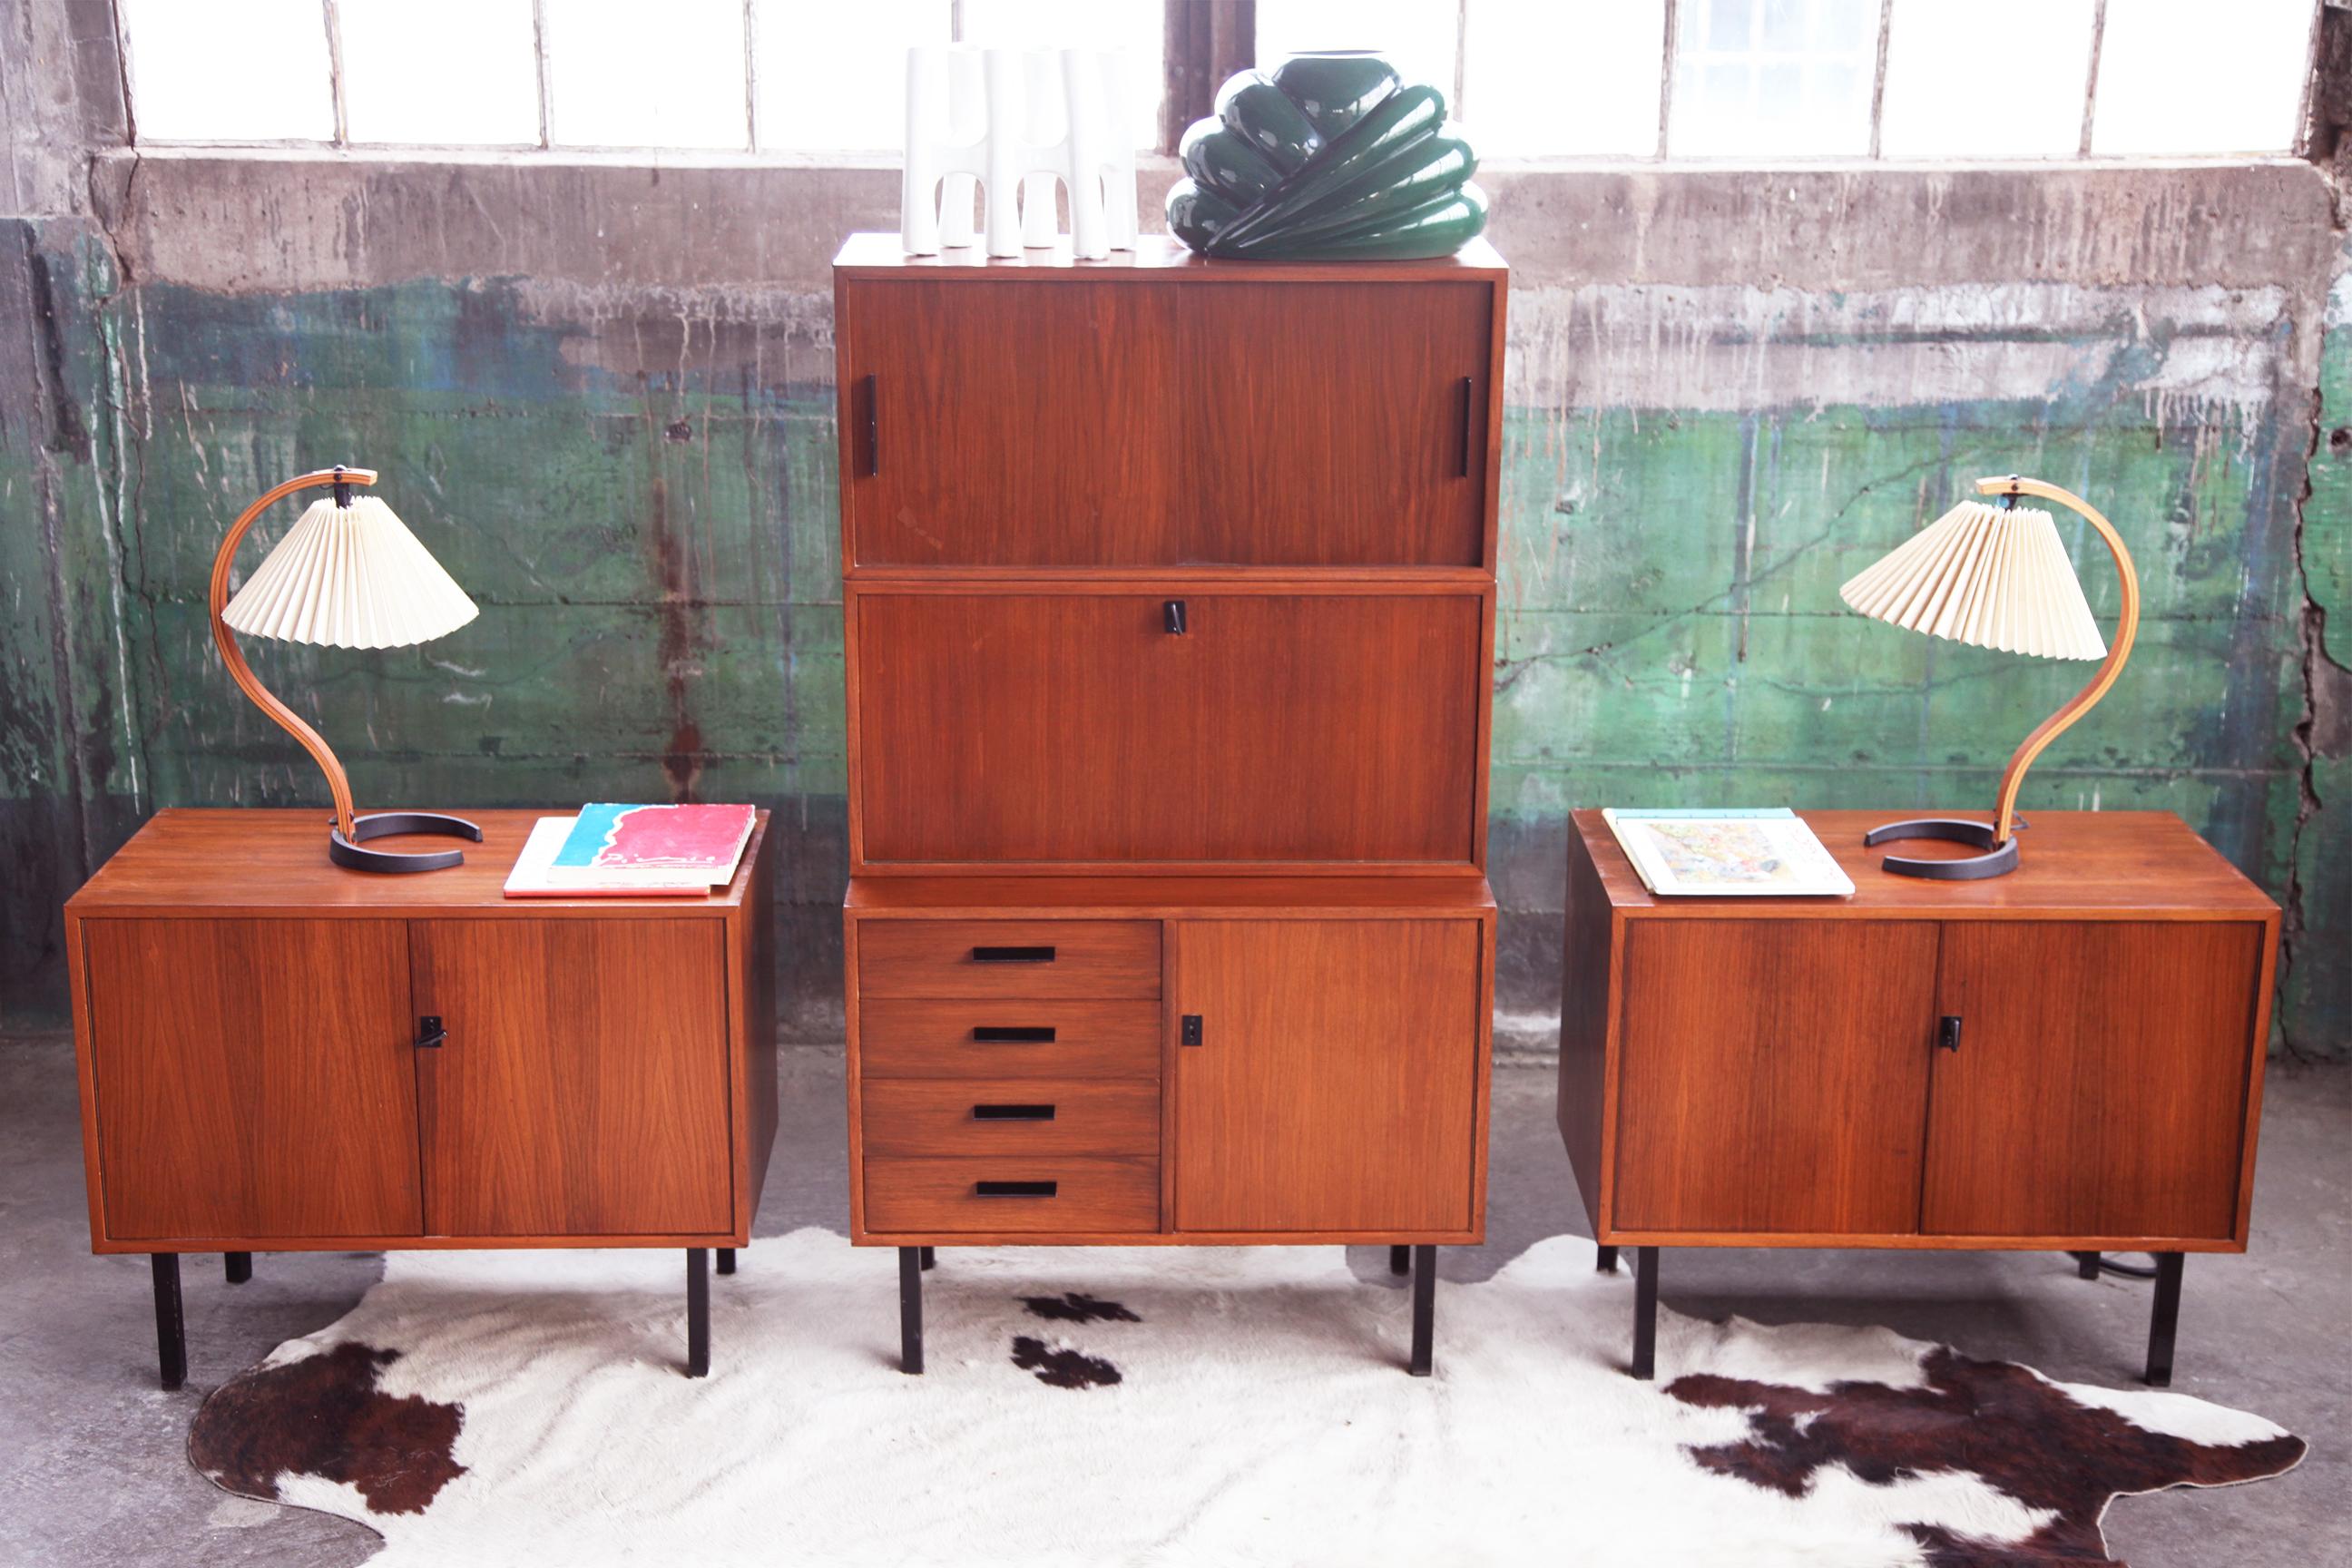 This very unique modular 5 Piece Mid Century wall unit set has it ALL, and leaves plenty of room for multiple configuration possibilities! Creatively hold and display all of your vinyl, stereo system, books, nicknacks, magazines etc etc etc.

Each